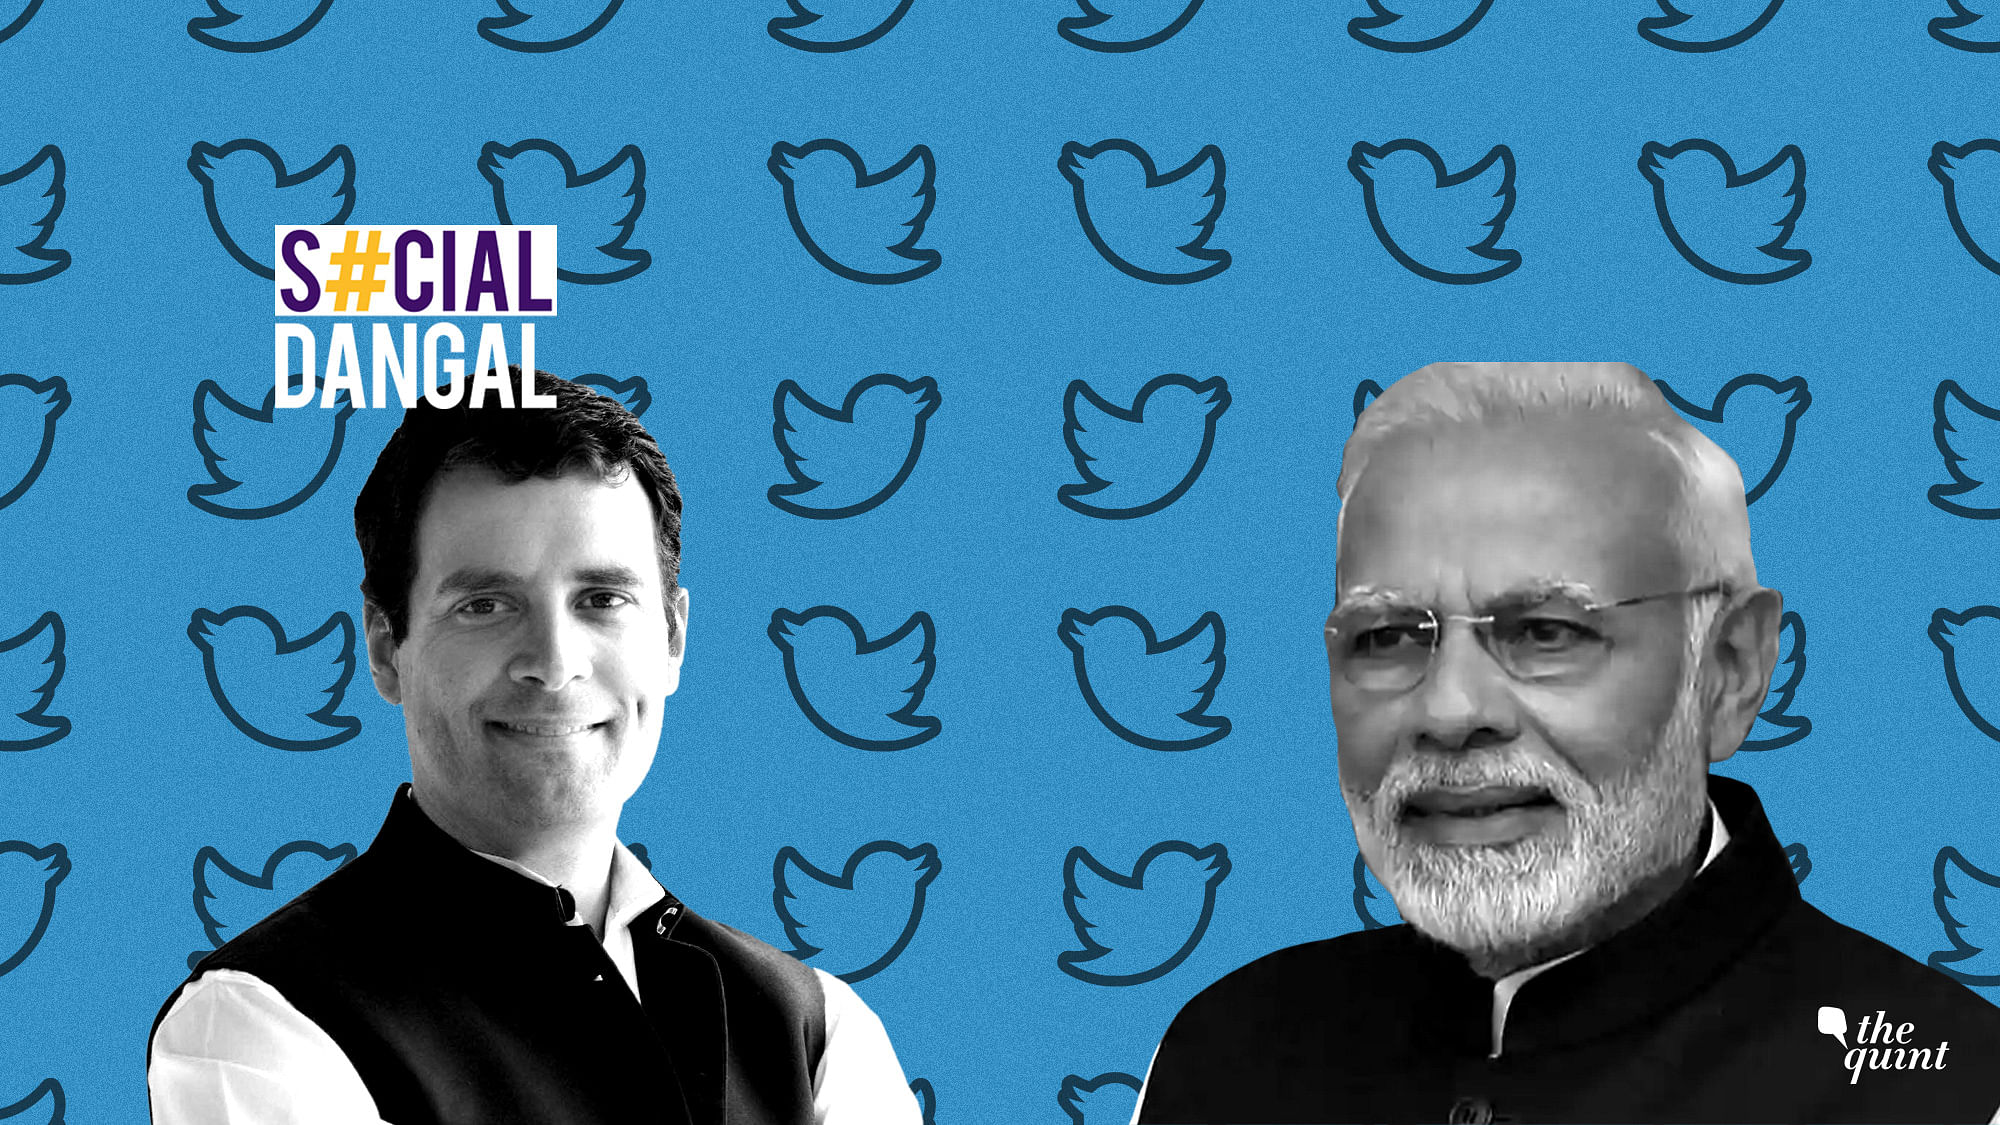 Despite joining Twitter several years after Modi, Rahul Gandhi has liked far more tweets than the prime minister.